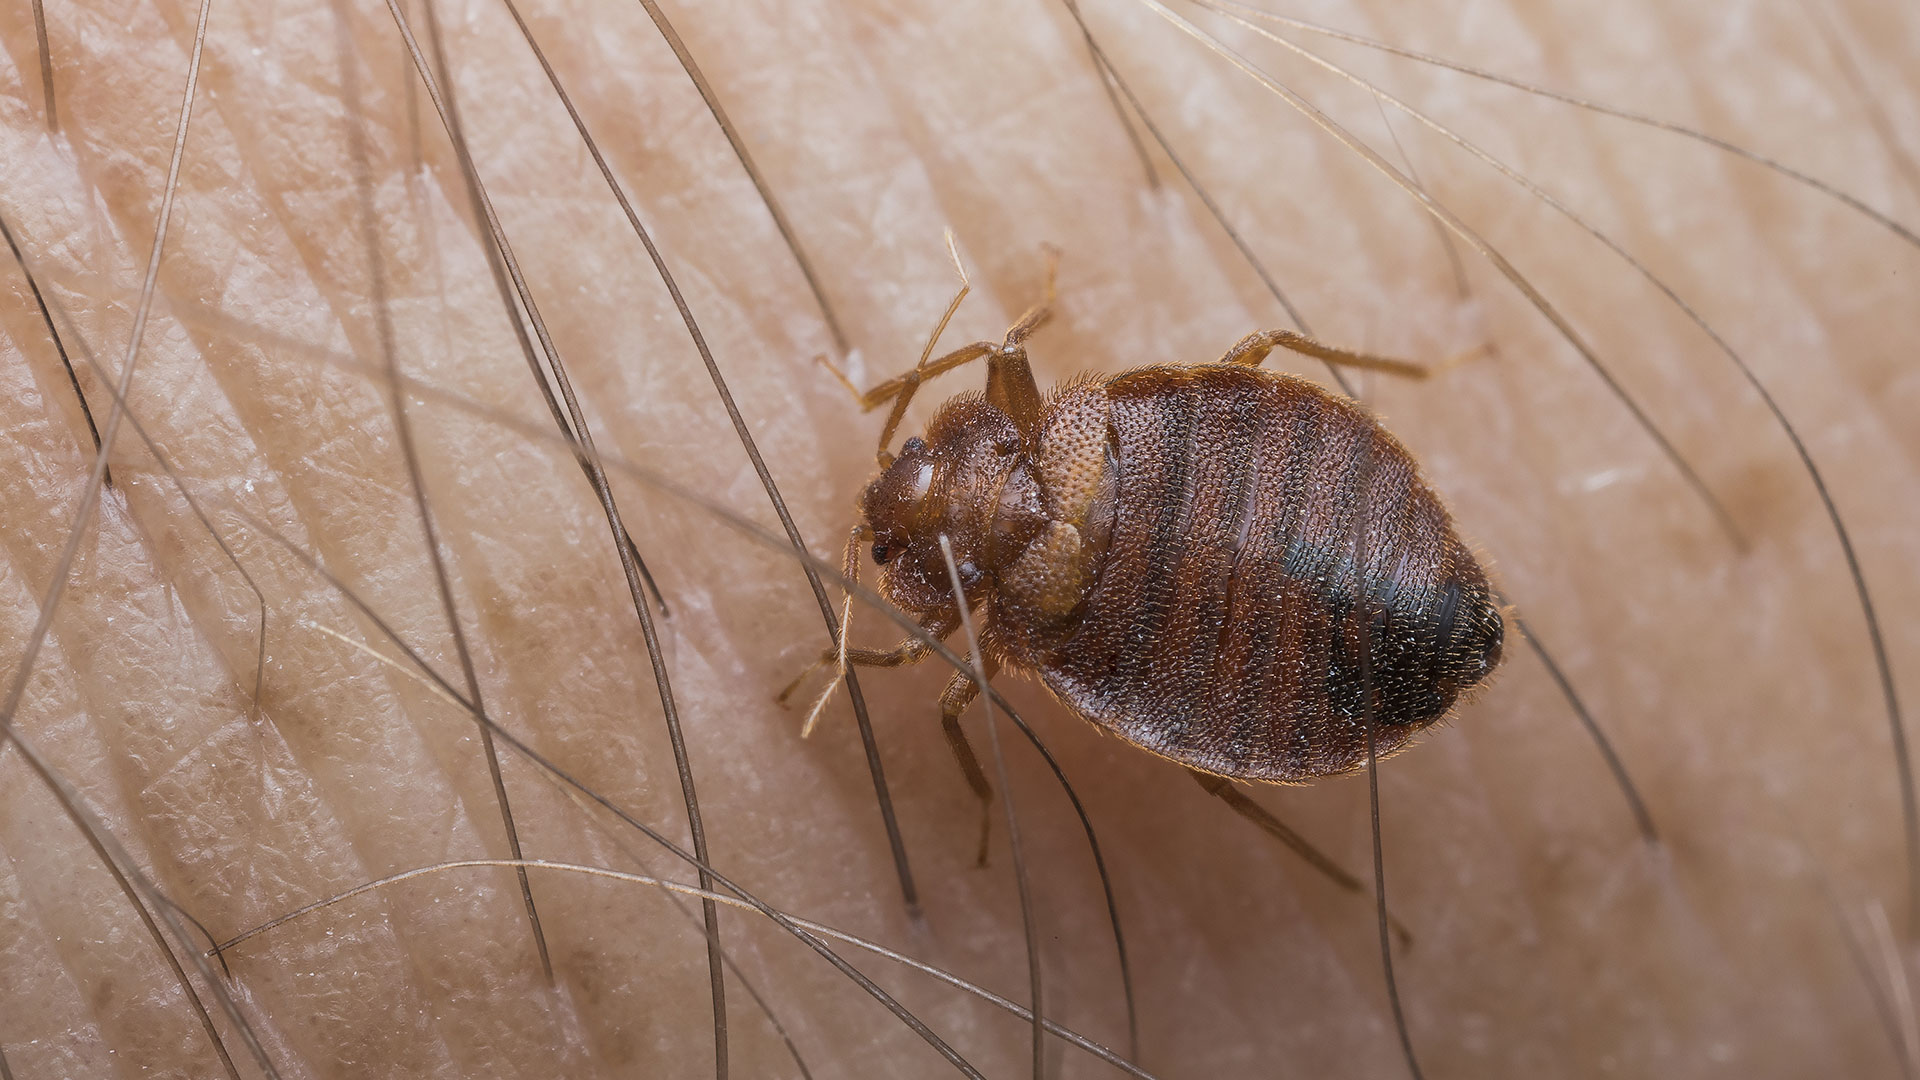 Got Bed Bugs? Don’t Panic - Here’s What to Do